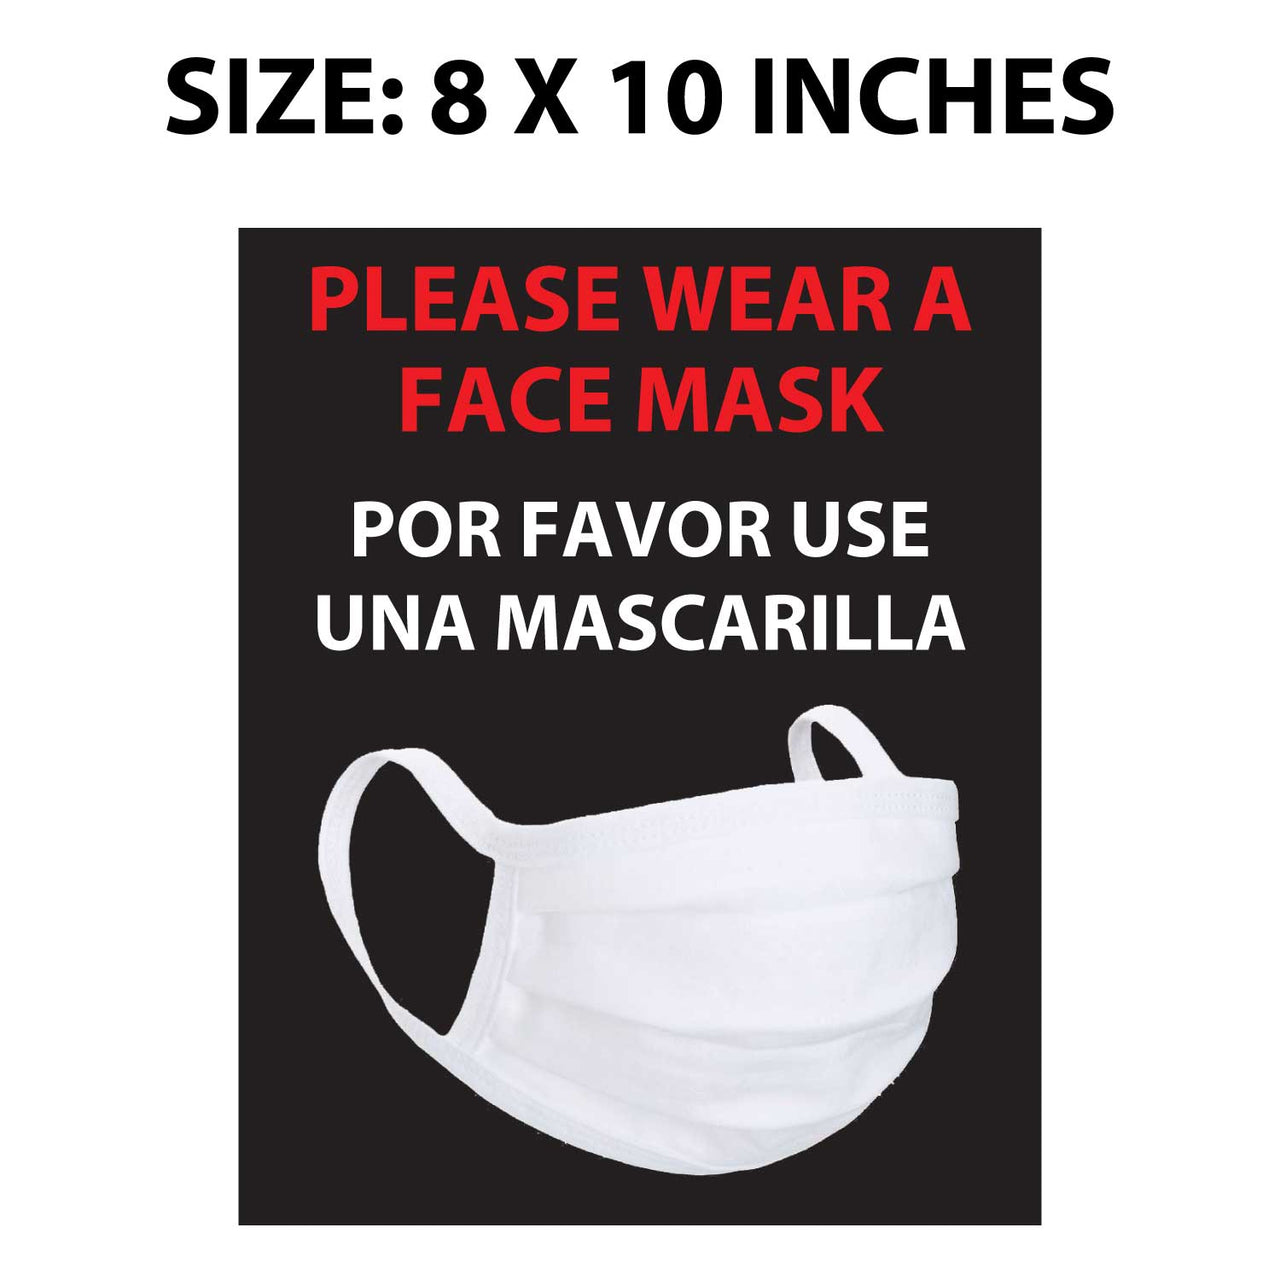 Please wear mask English and Spanish window cling decals